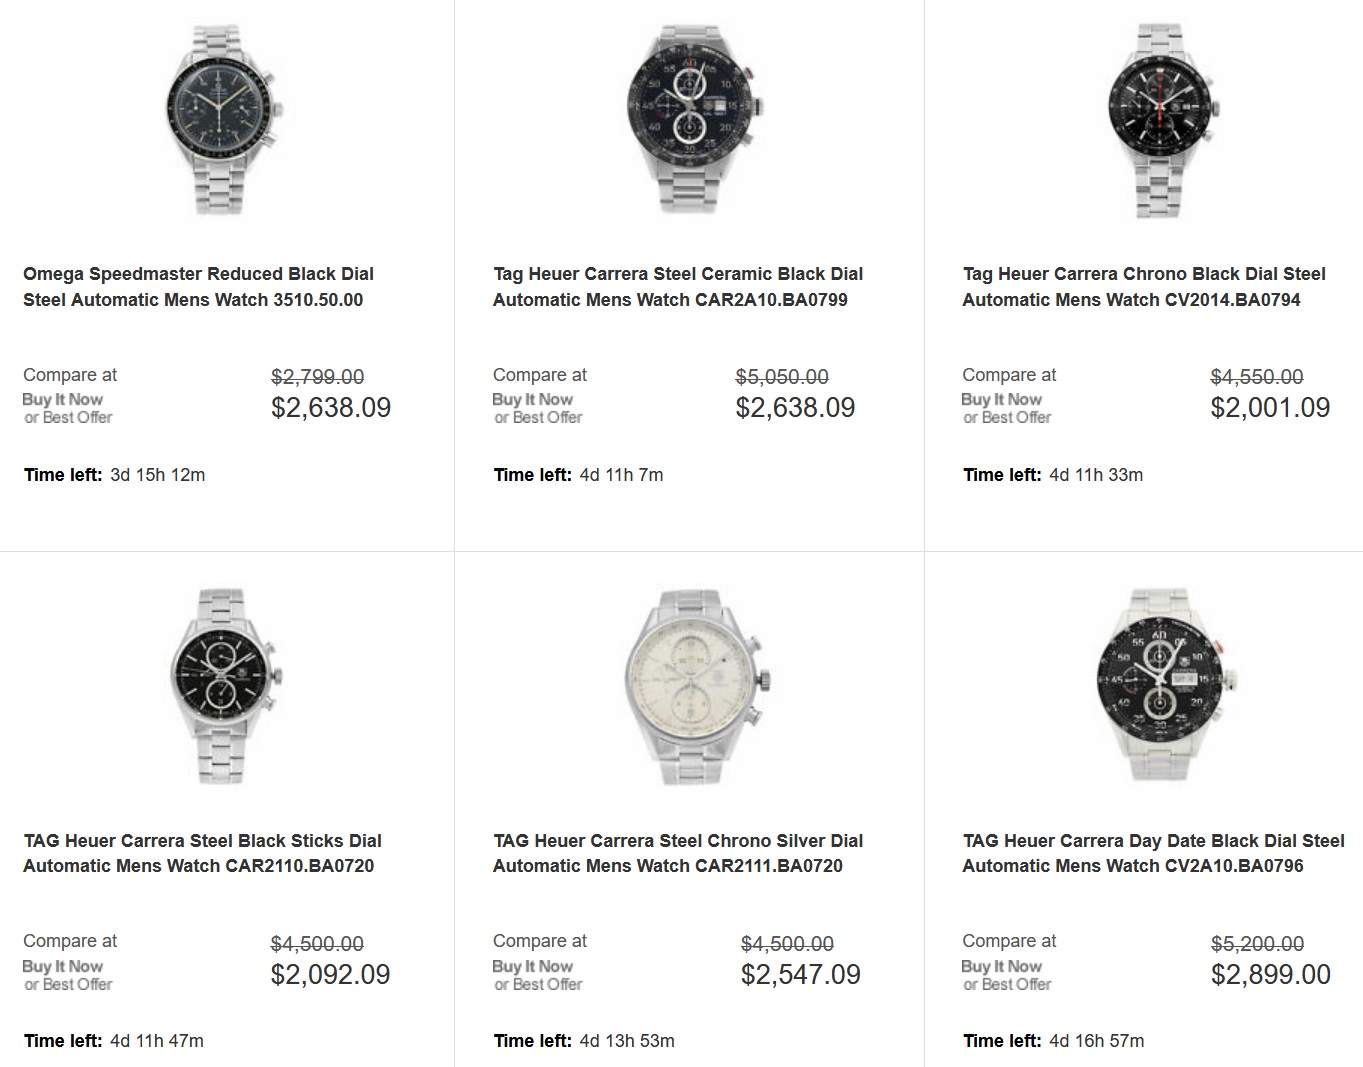 Exclusive 500 Voucher For Watches Sold By This eBay Store aBlogtoWatch